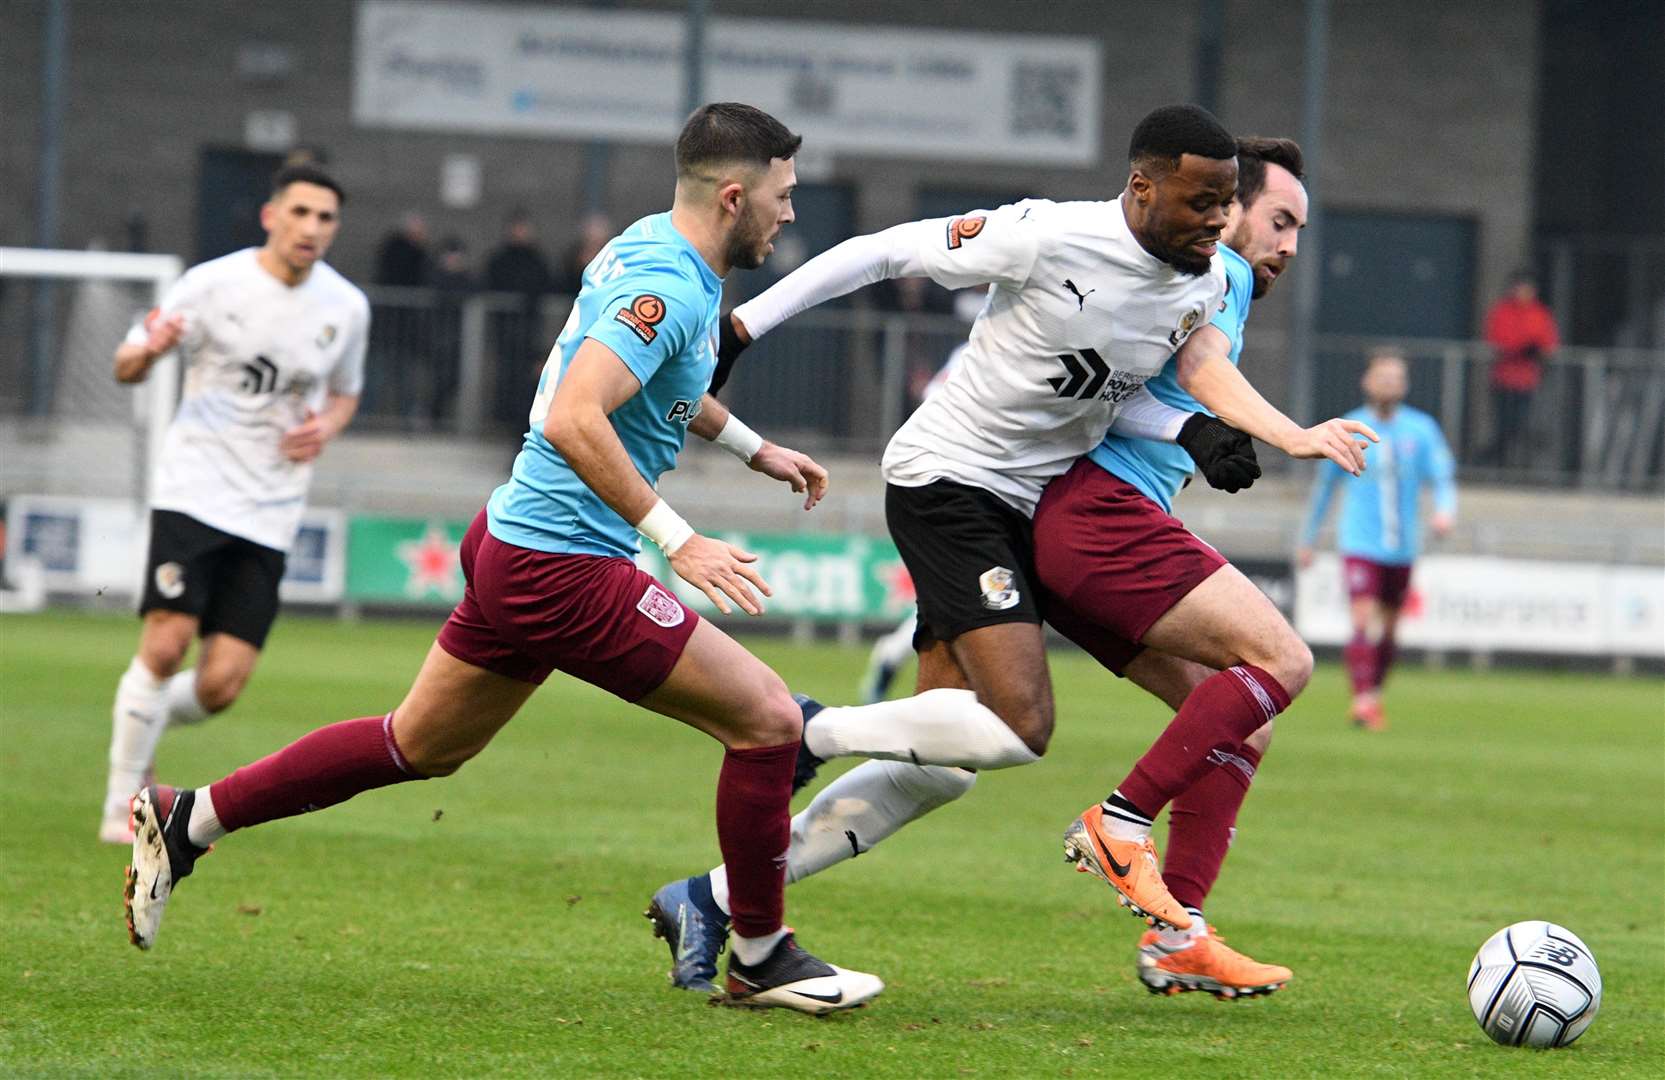 Kalvin Kalala breaks through the Weymouth defence. Picture: Barry Goodwin (54285220)